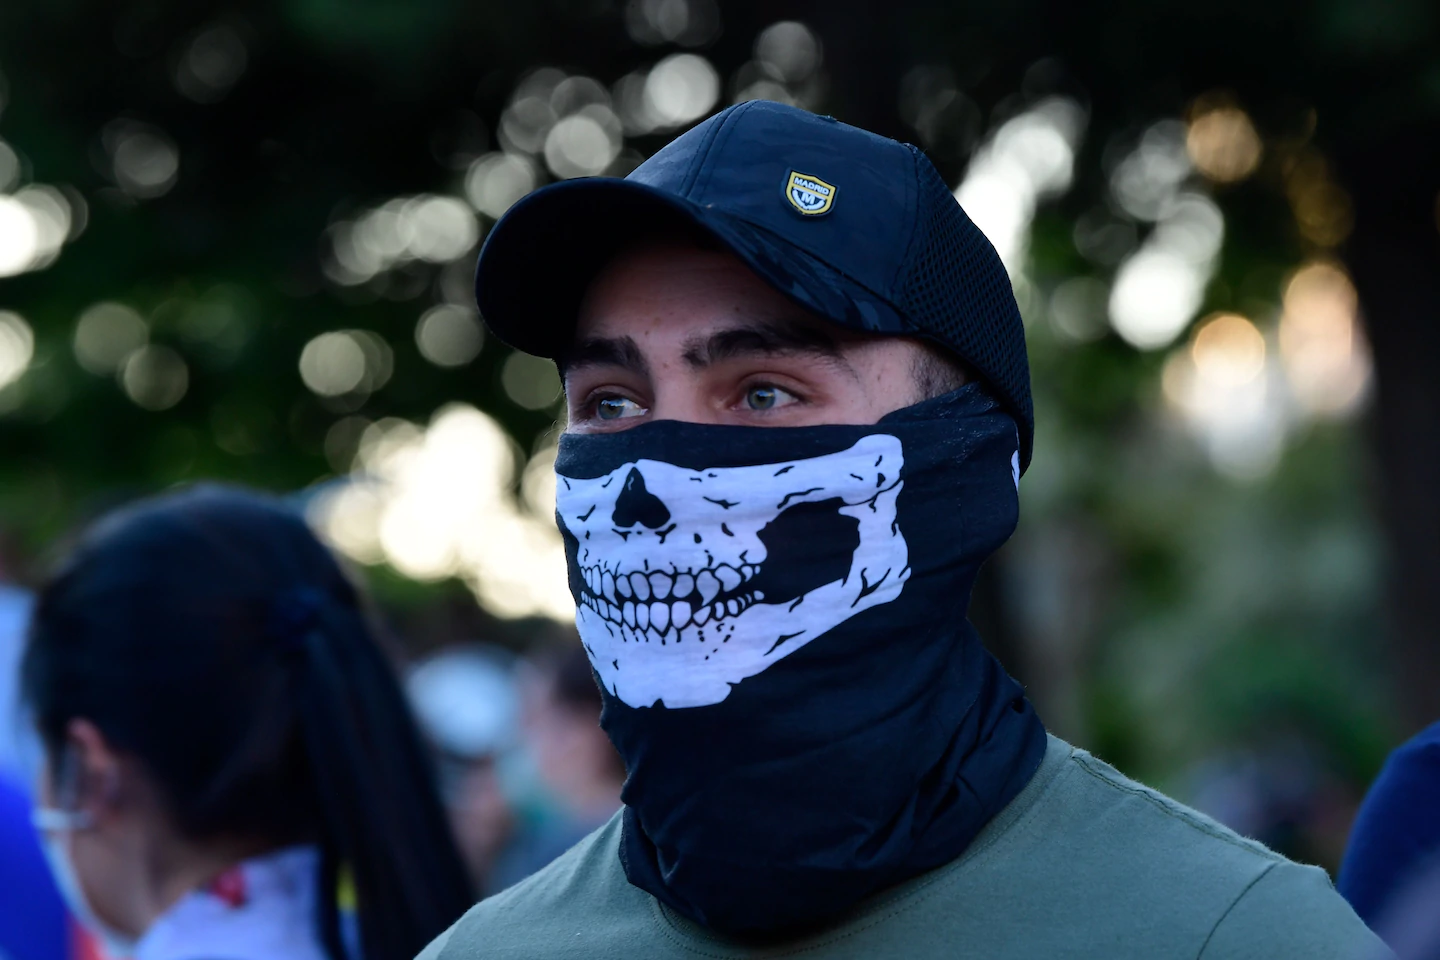 Wearing a neck gaiter may be worse than no mask at all, researchers find